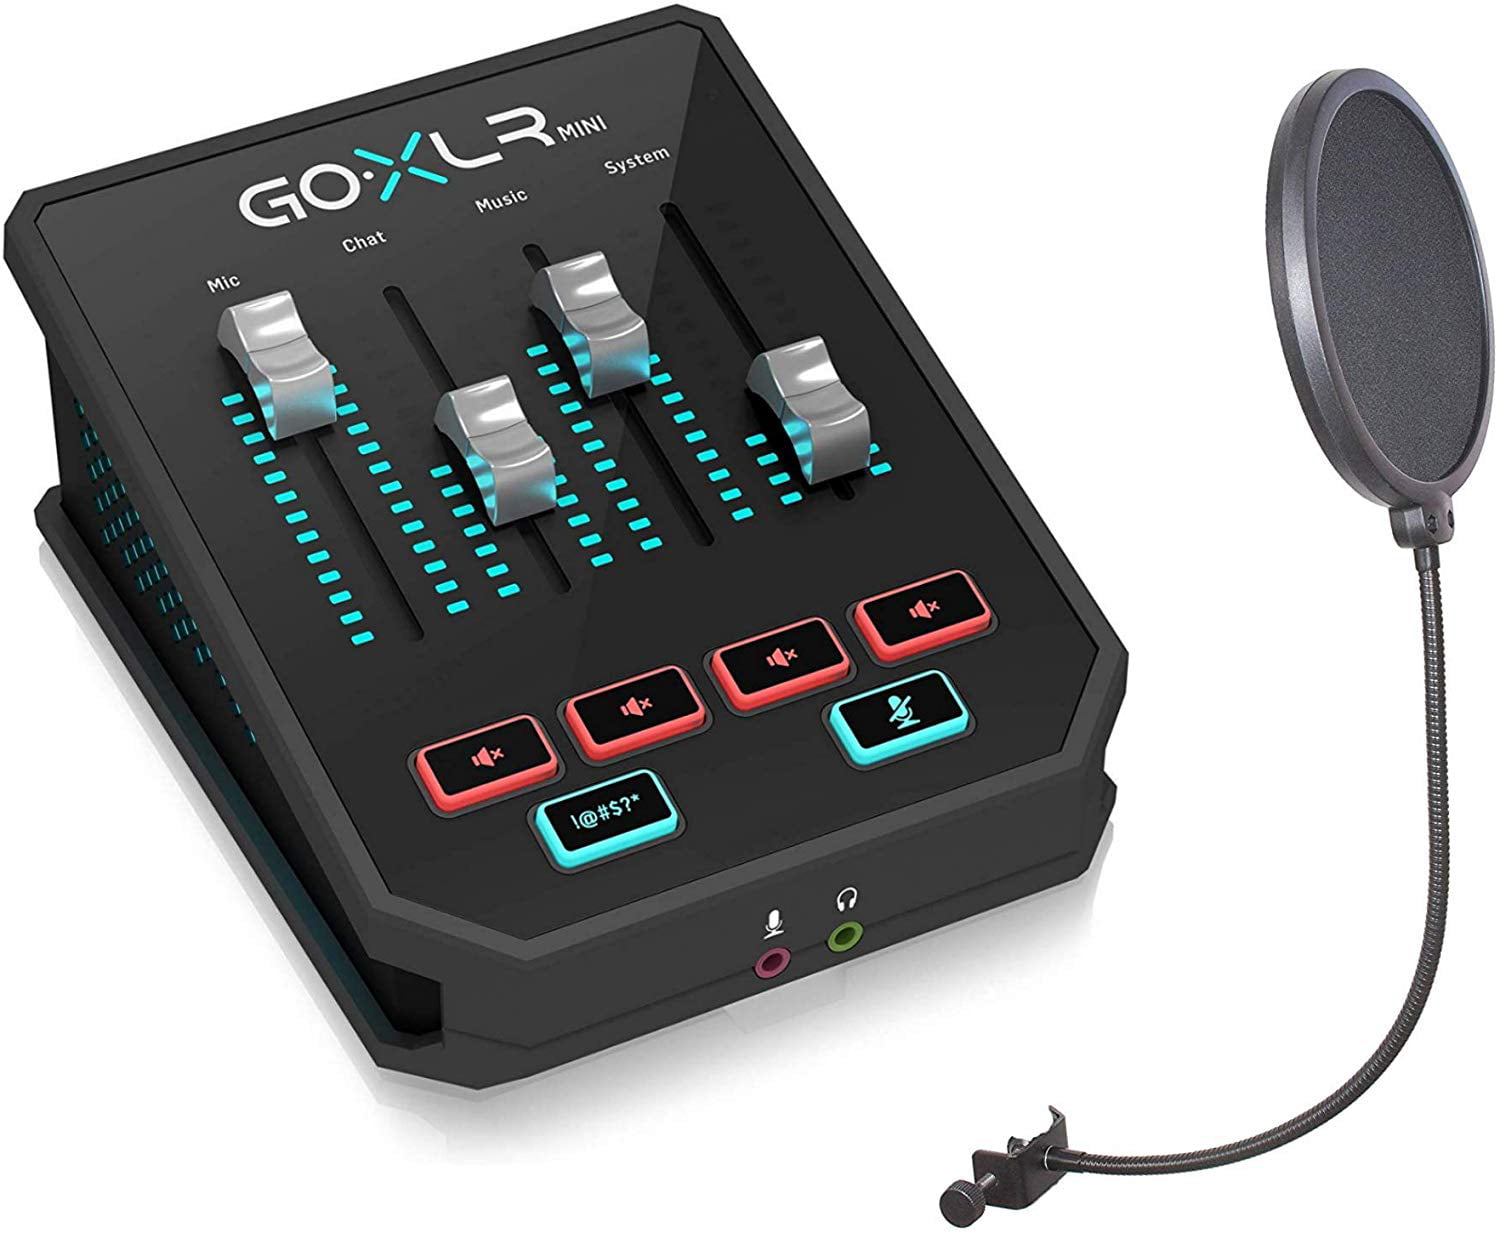 GoXLR Mini - Mixer & USB Audio Interface for Streamers, Gamers & Podcasters  - Bundled with Microphone Pop Screen